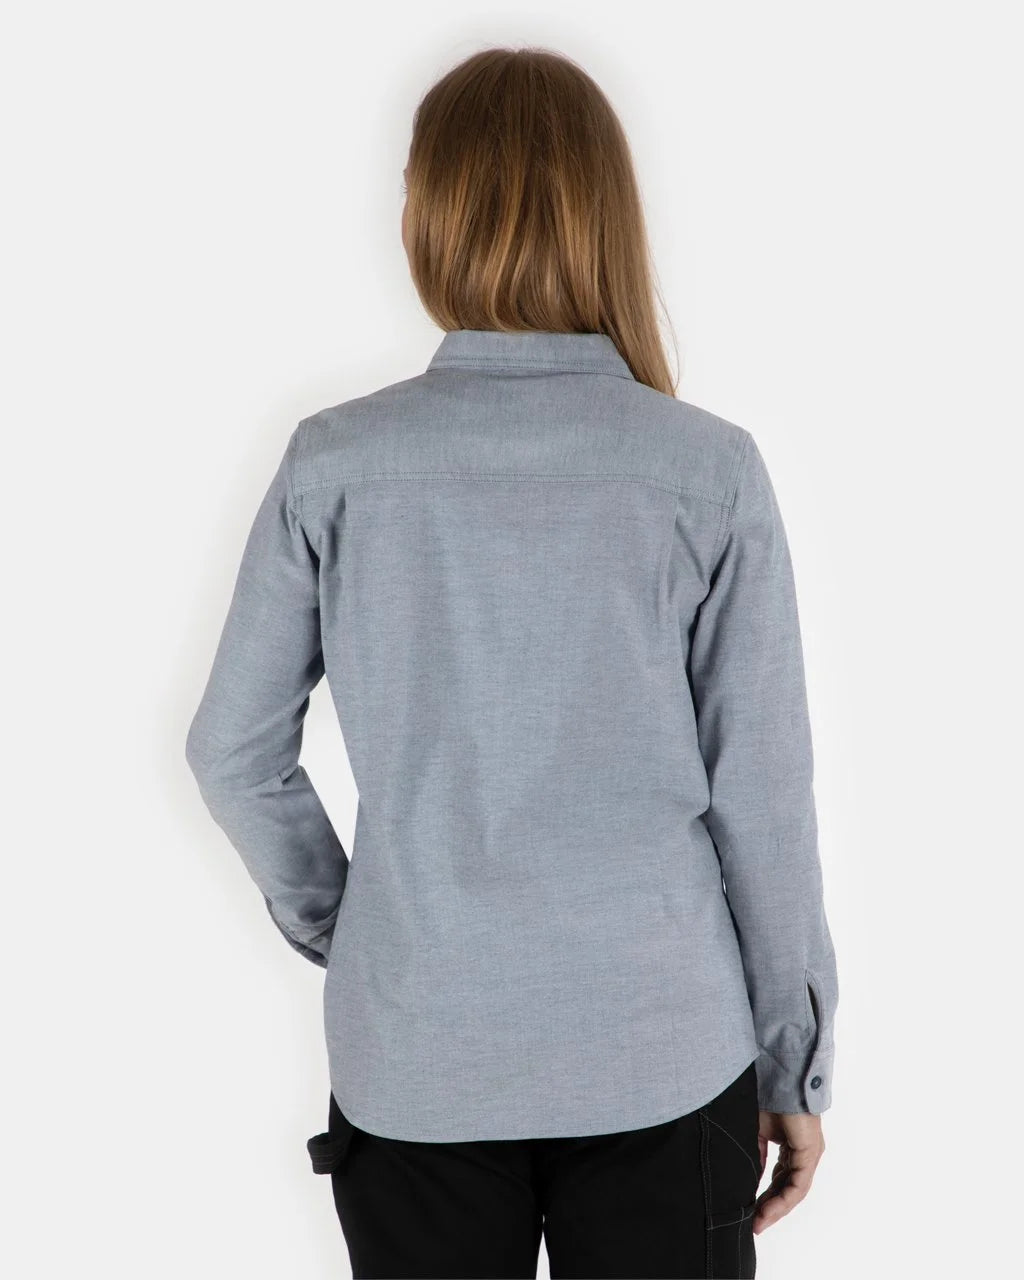 Work Shirts for Women - Premium Collection of Women's Work Tops